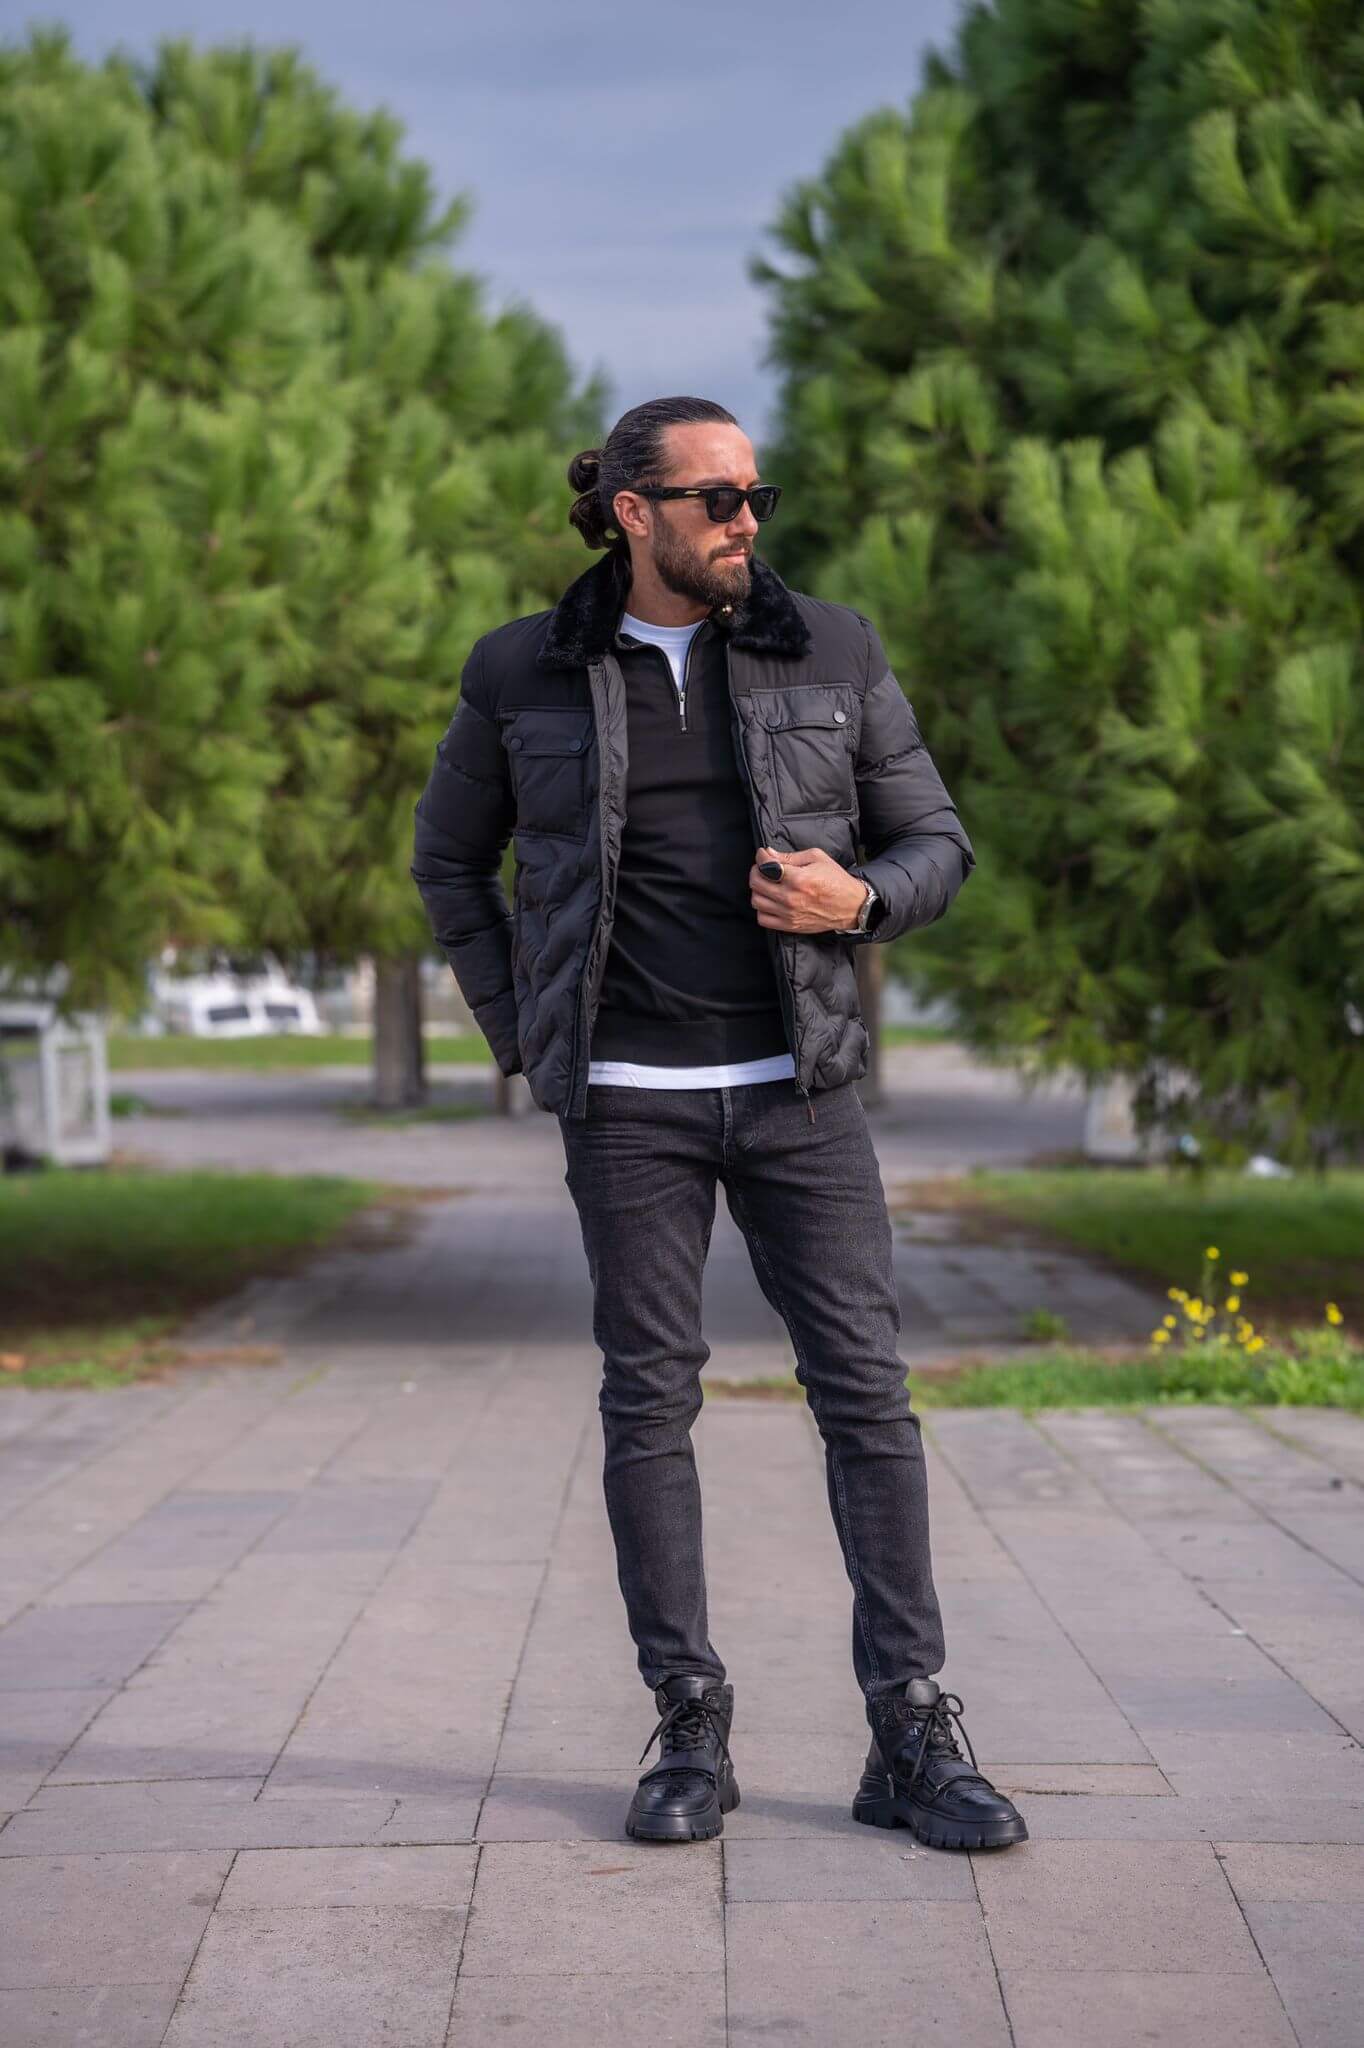 A stylish male model confidently wears our sleek black bomber jacket, exuding urban cool vibes."